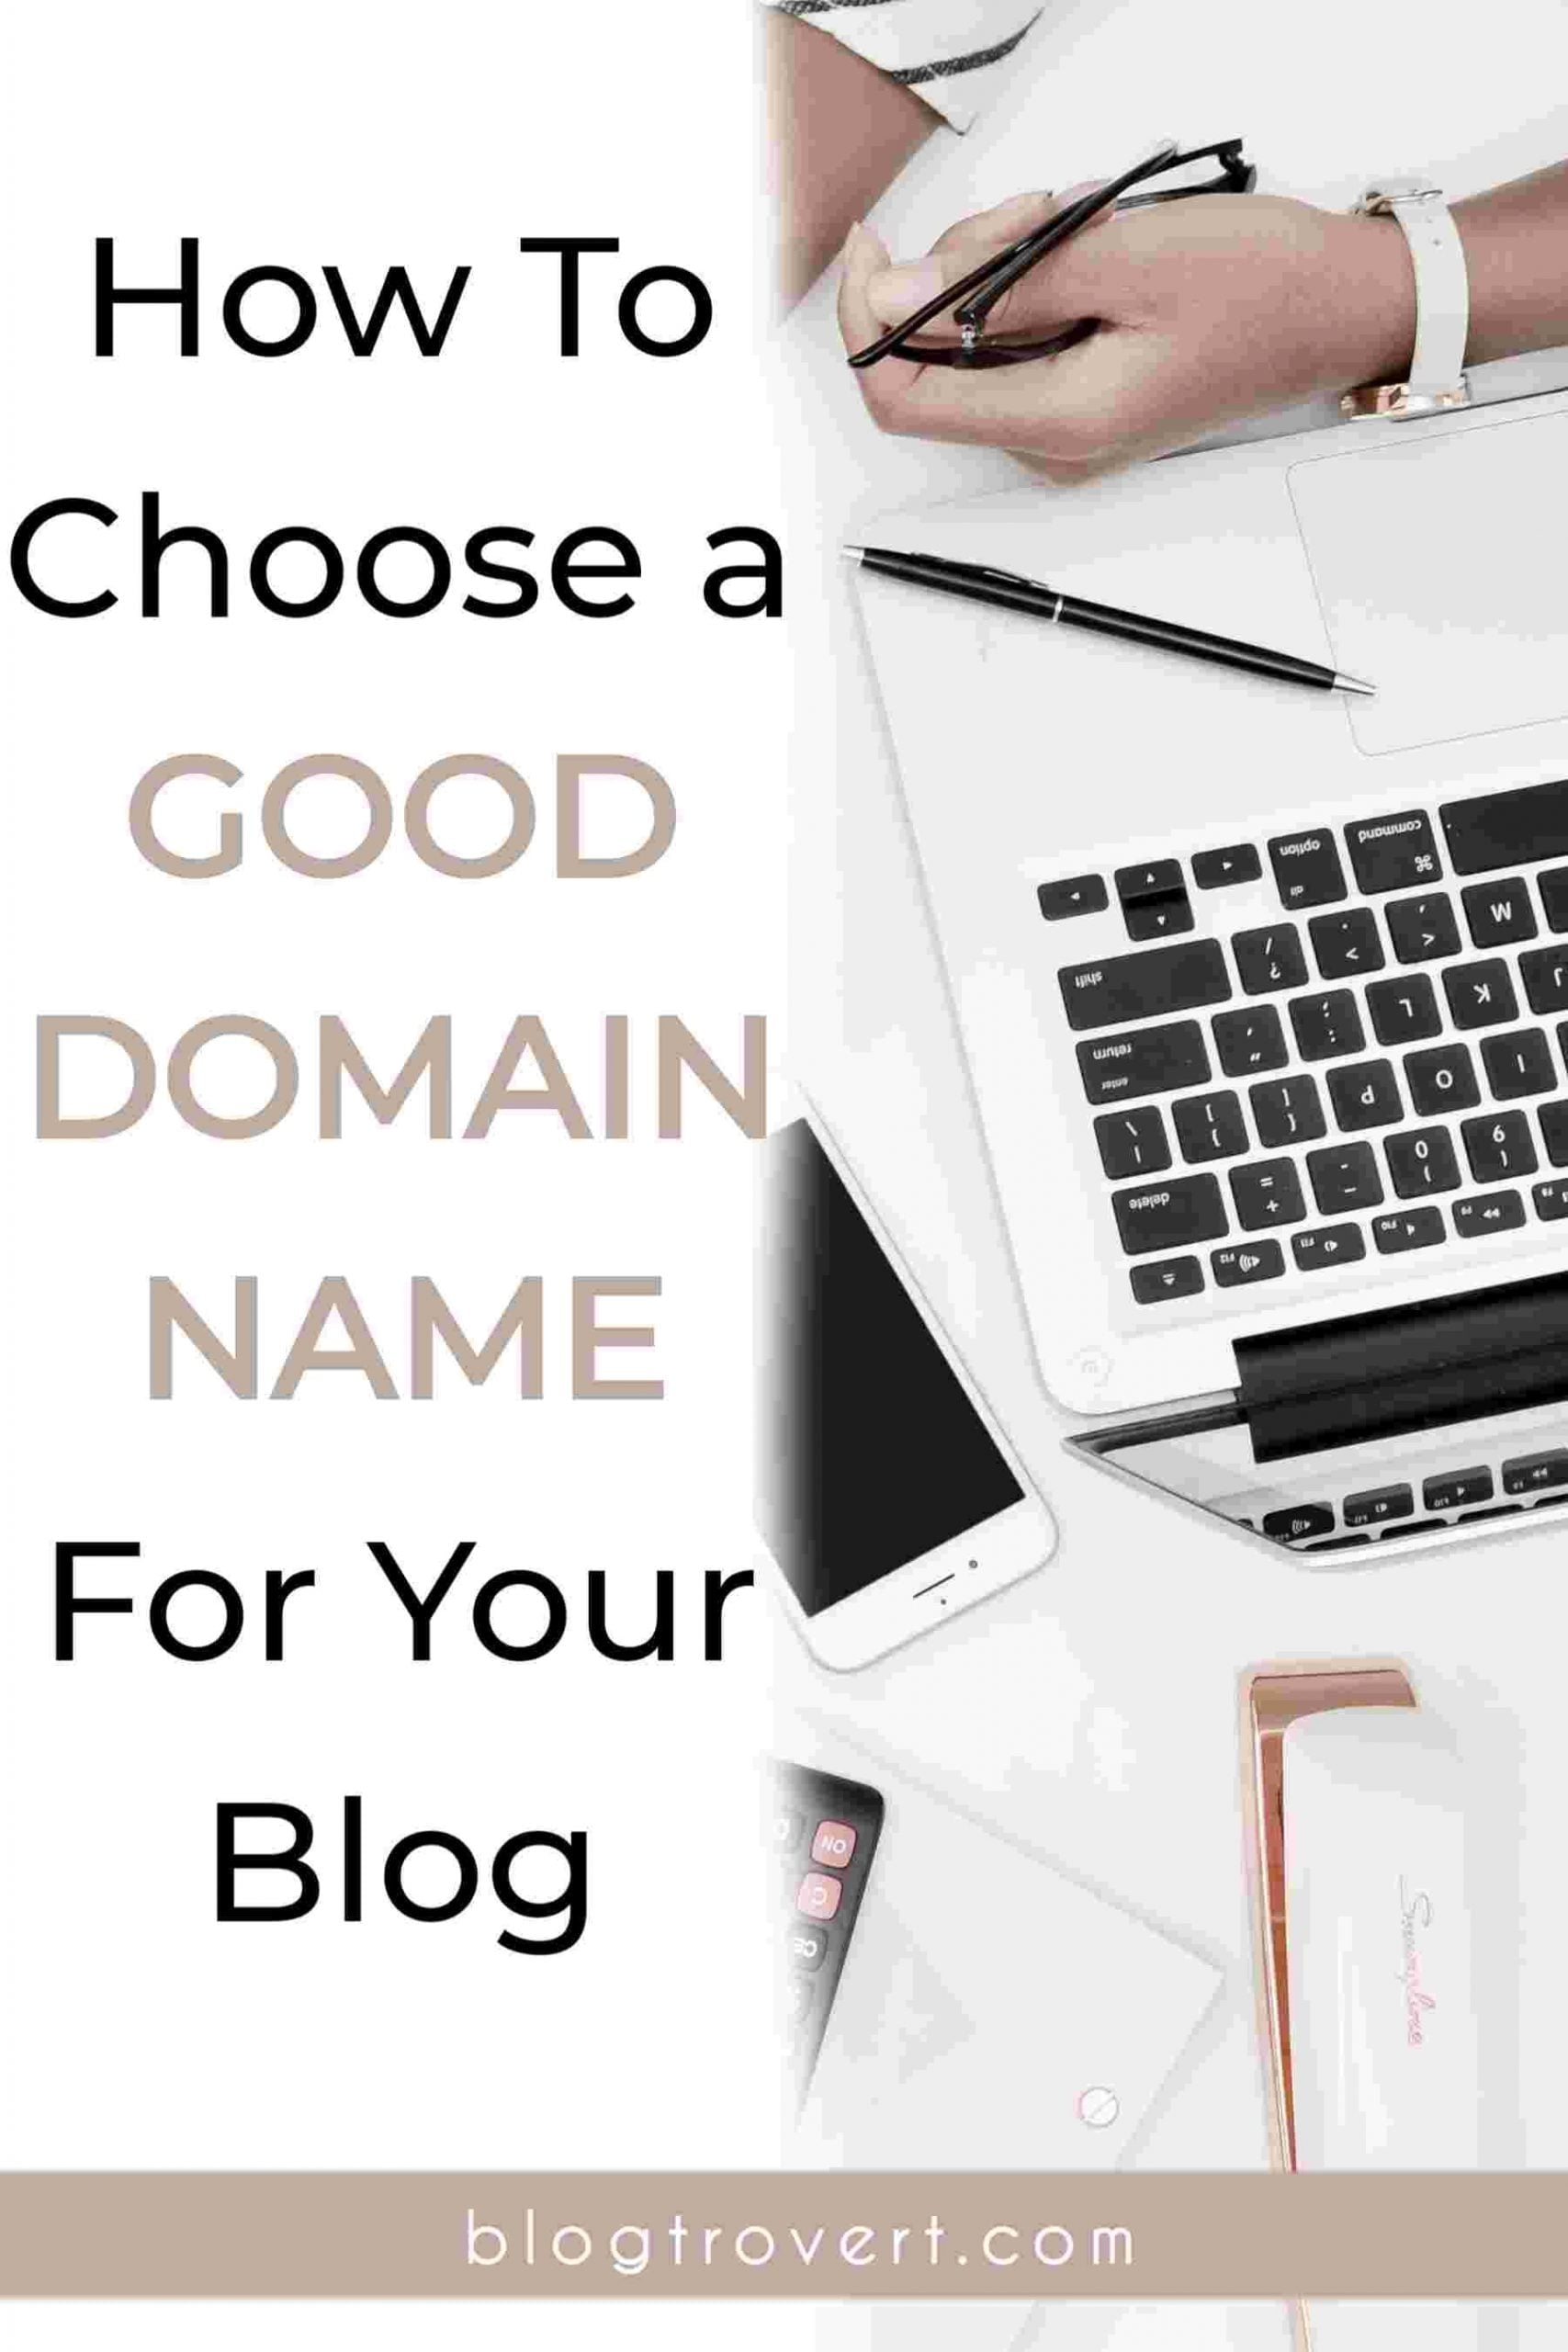 How To Choose a Good Domain Name For Your Blog; 13 Essential Tips 2